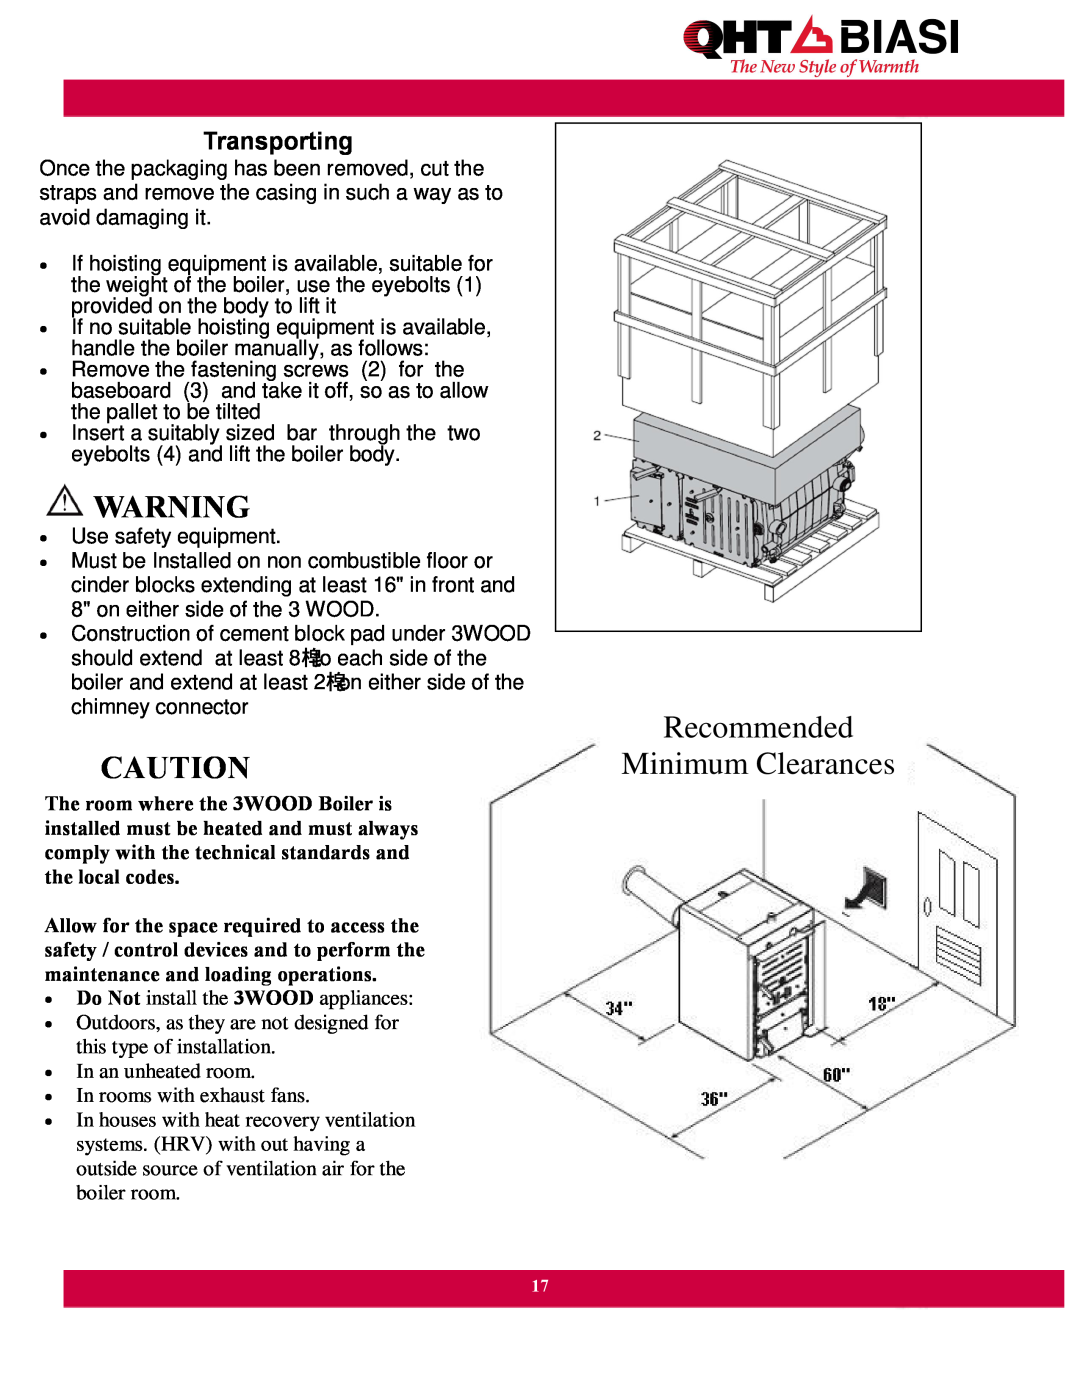 QHT Boiler manual Recommended Minimum Clearances, Transporting 